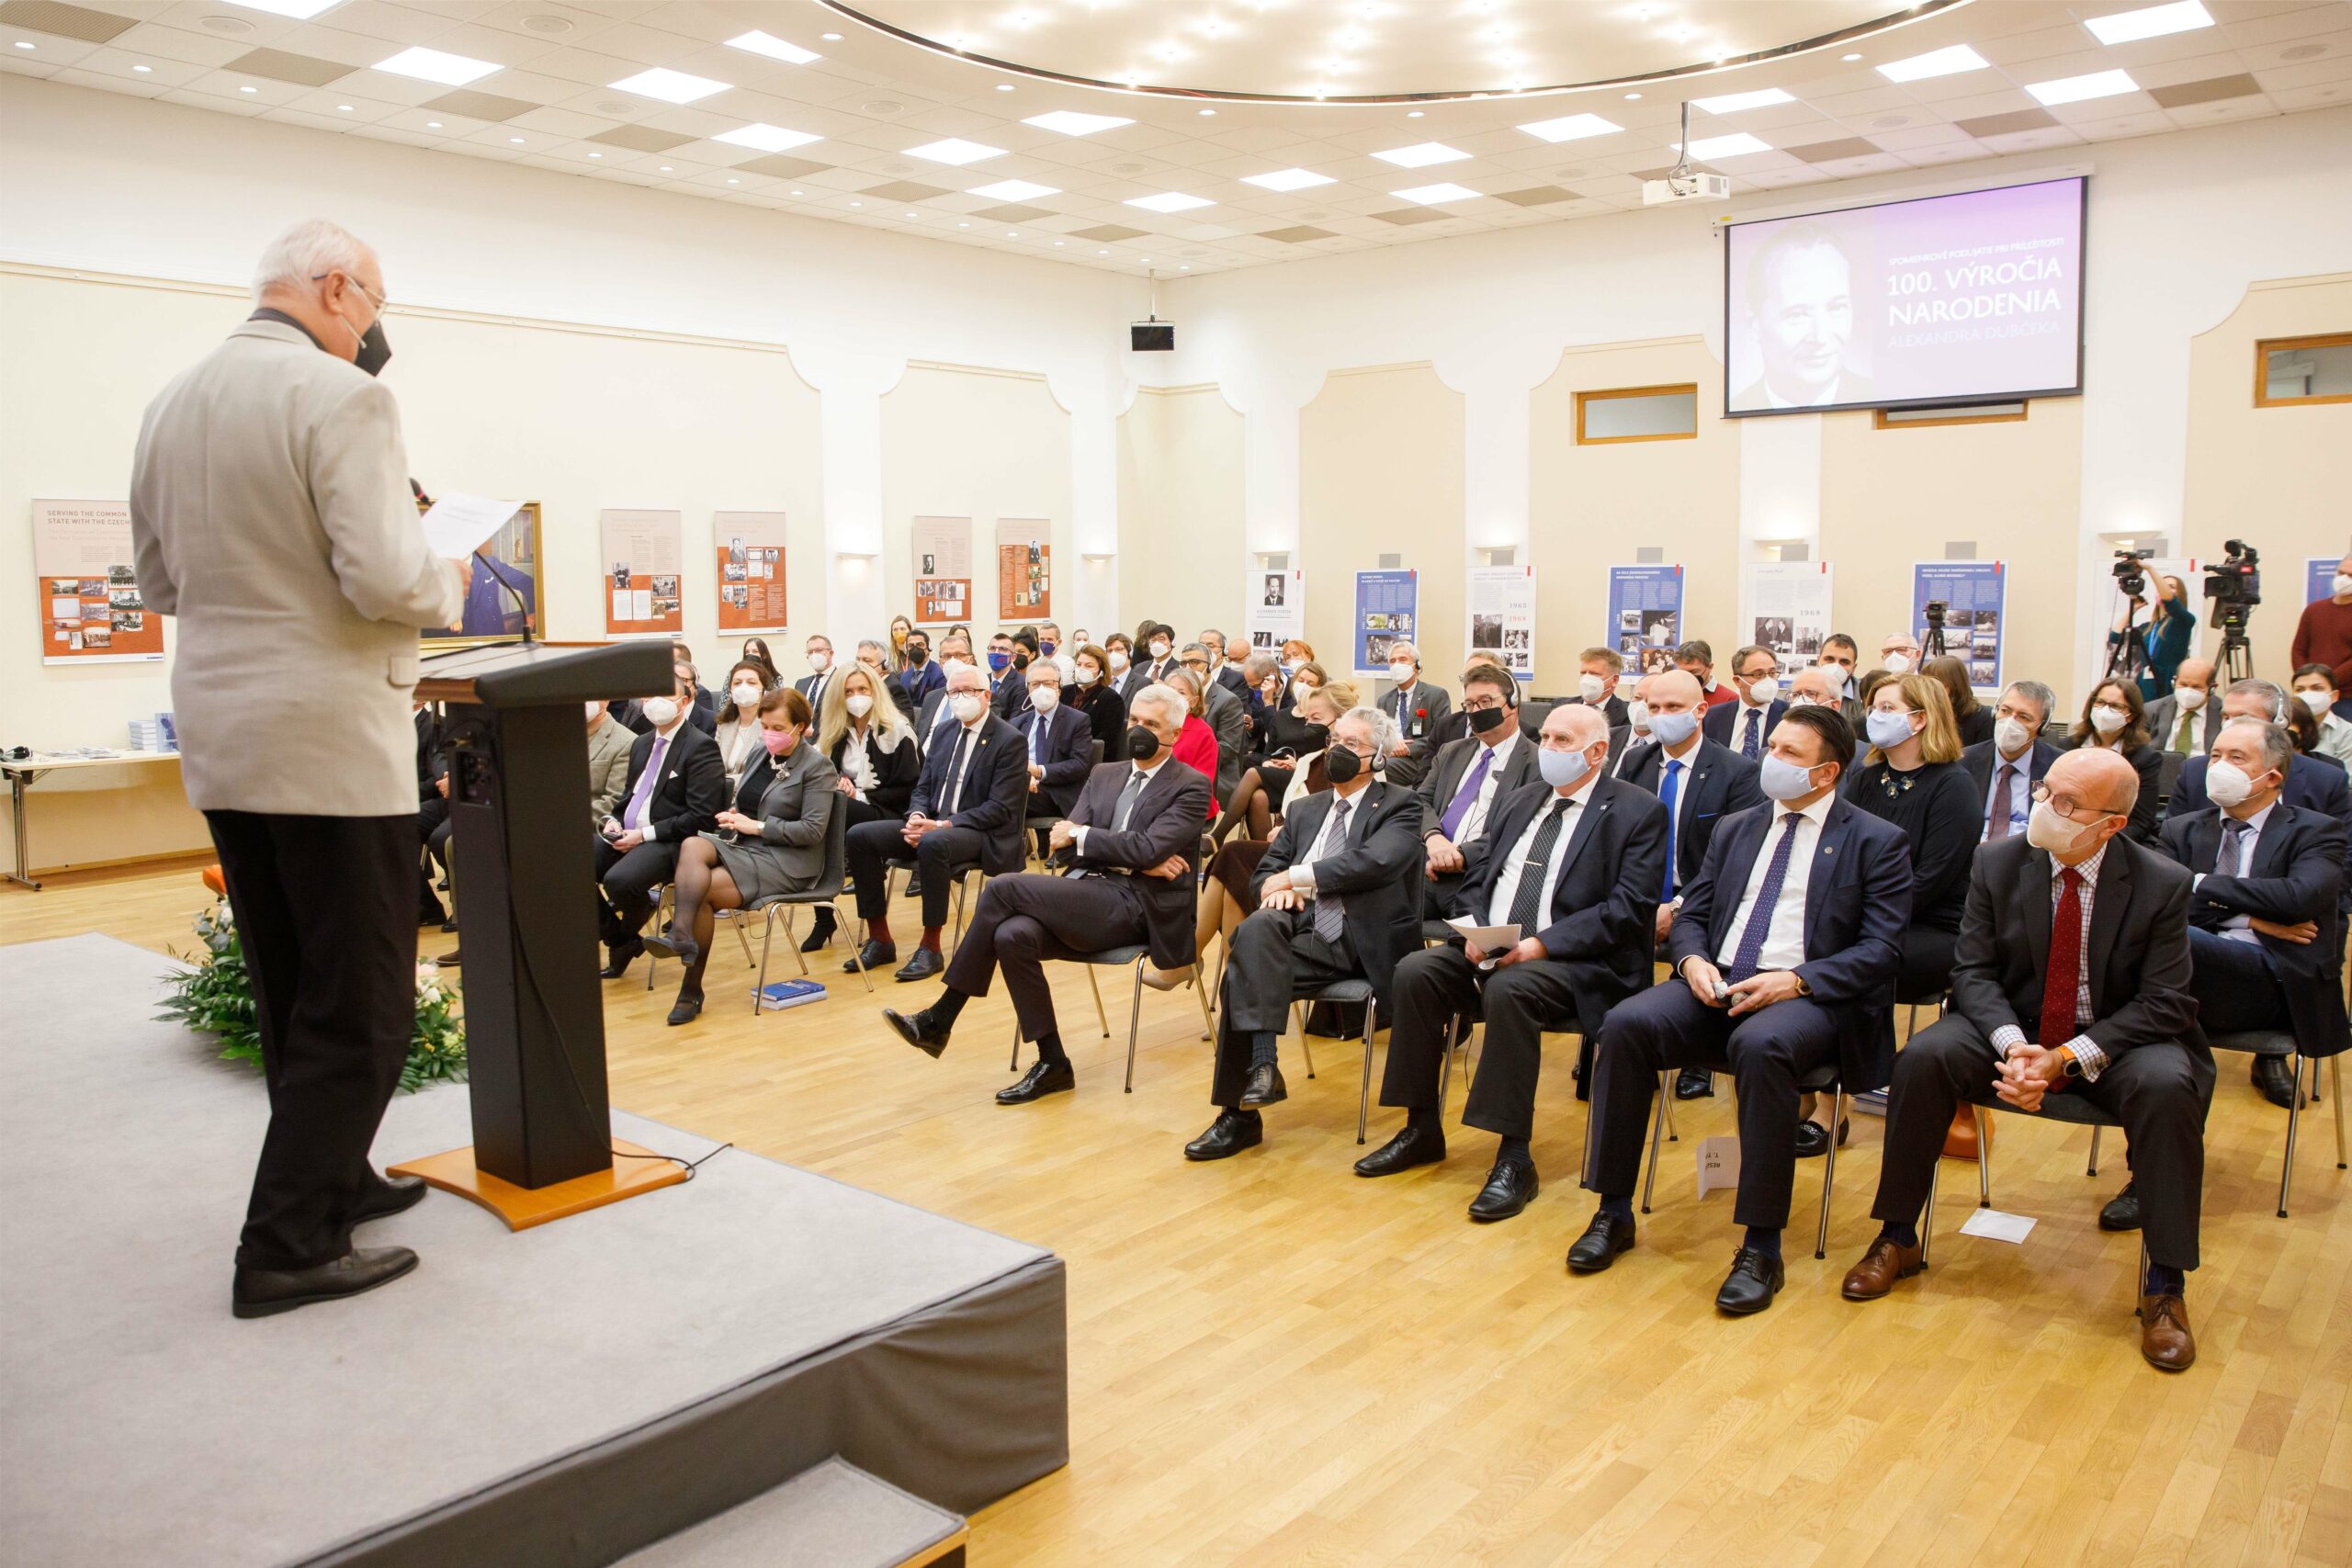 Commemorative event on the occasion of the 100th birth anniversary of Alexander Dubček